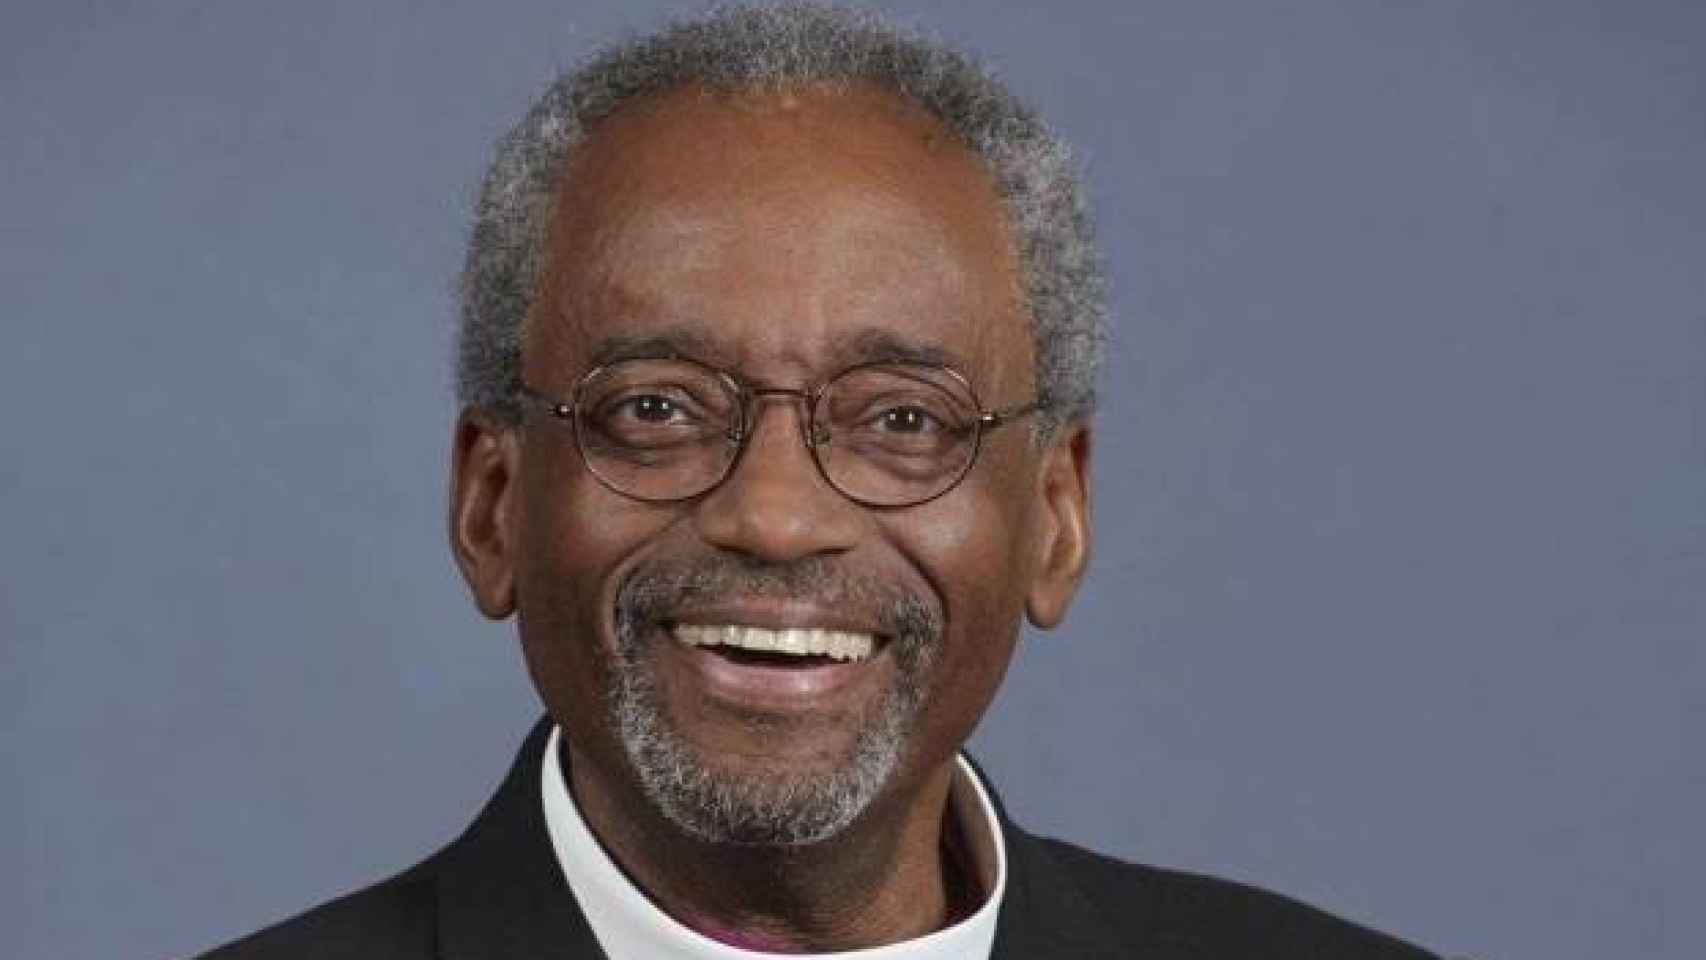 MIchael Curry.